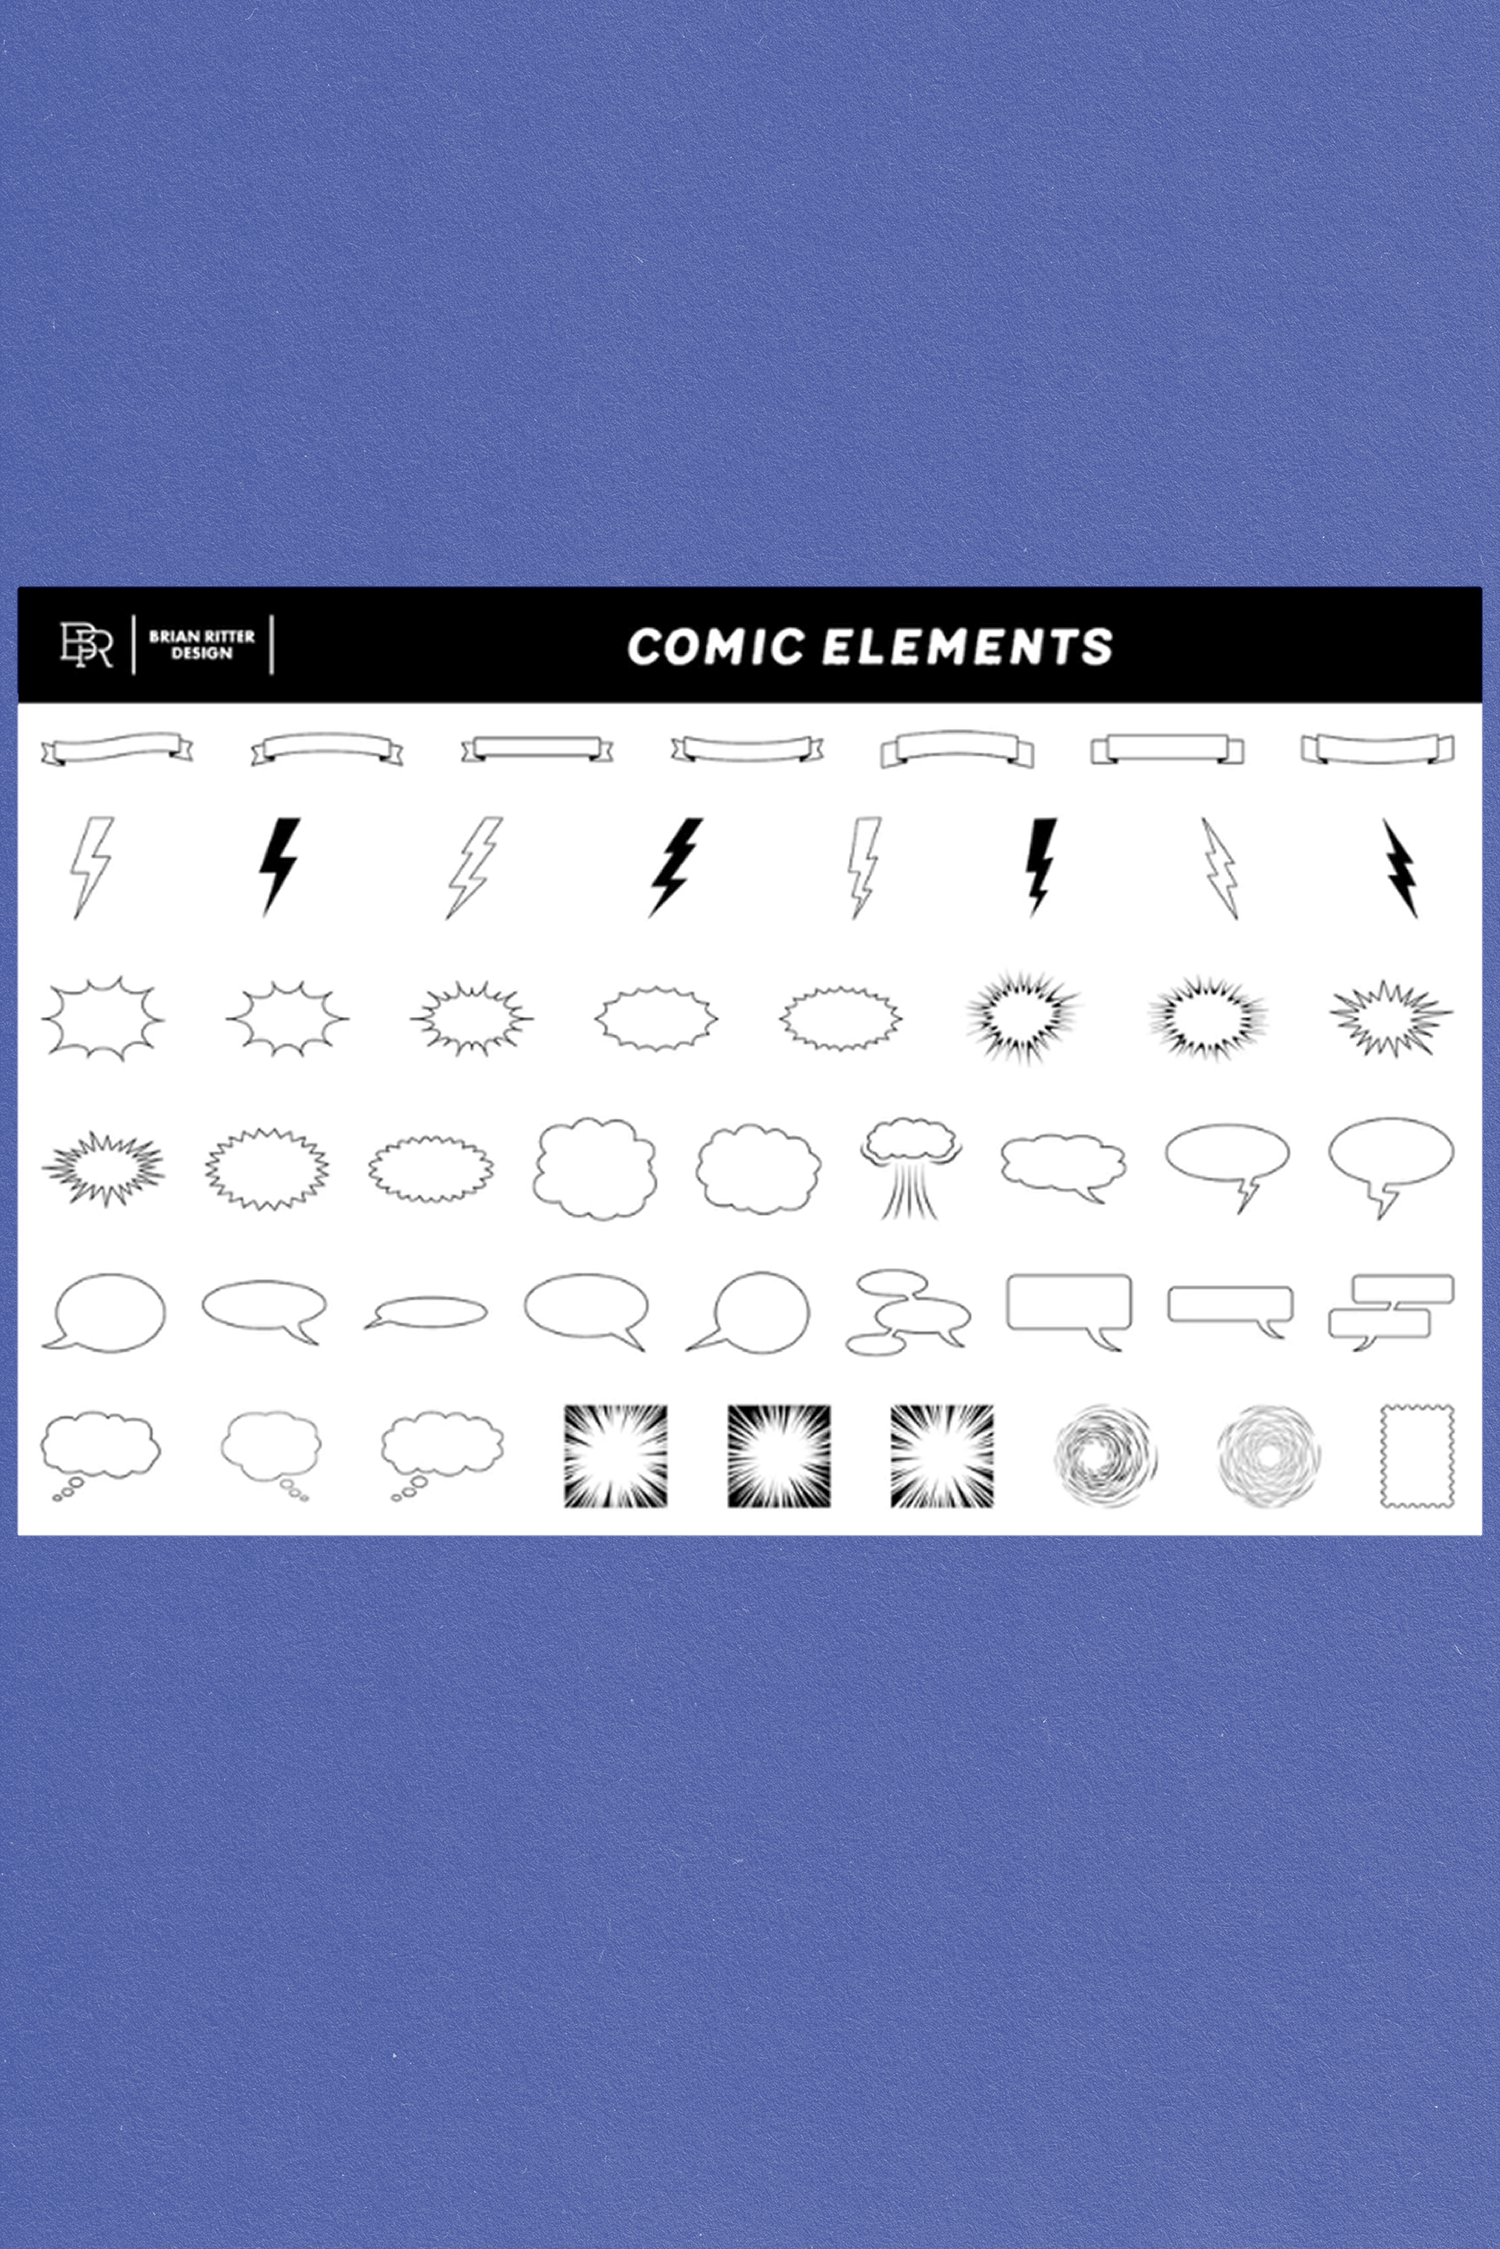 Comic Builder Toolkit by Brian Ritter Design